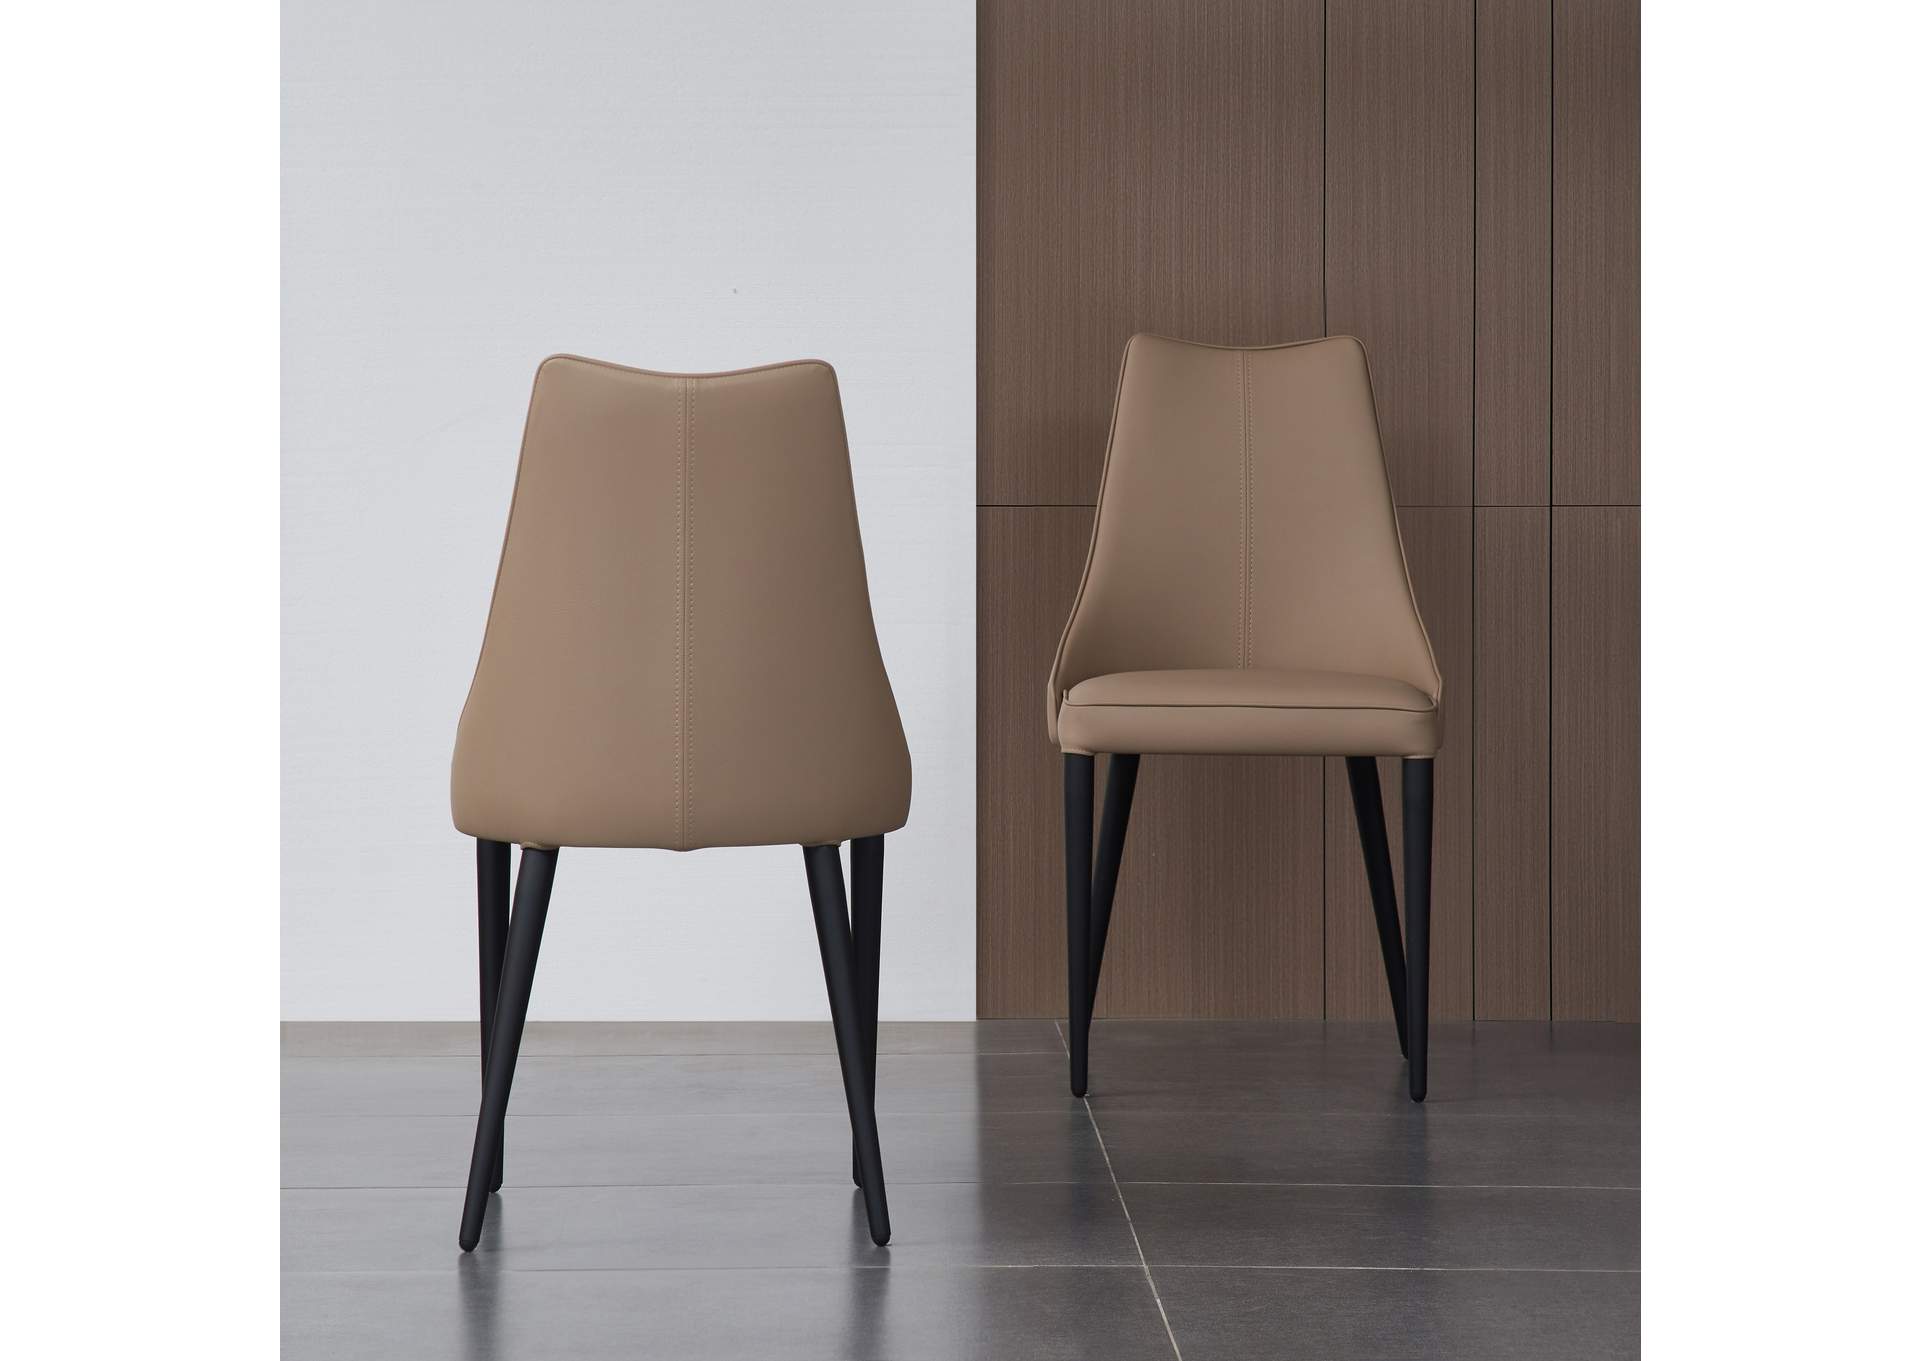 Ce Bosa Dining Chair,J&M Furniture